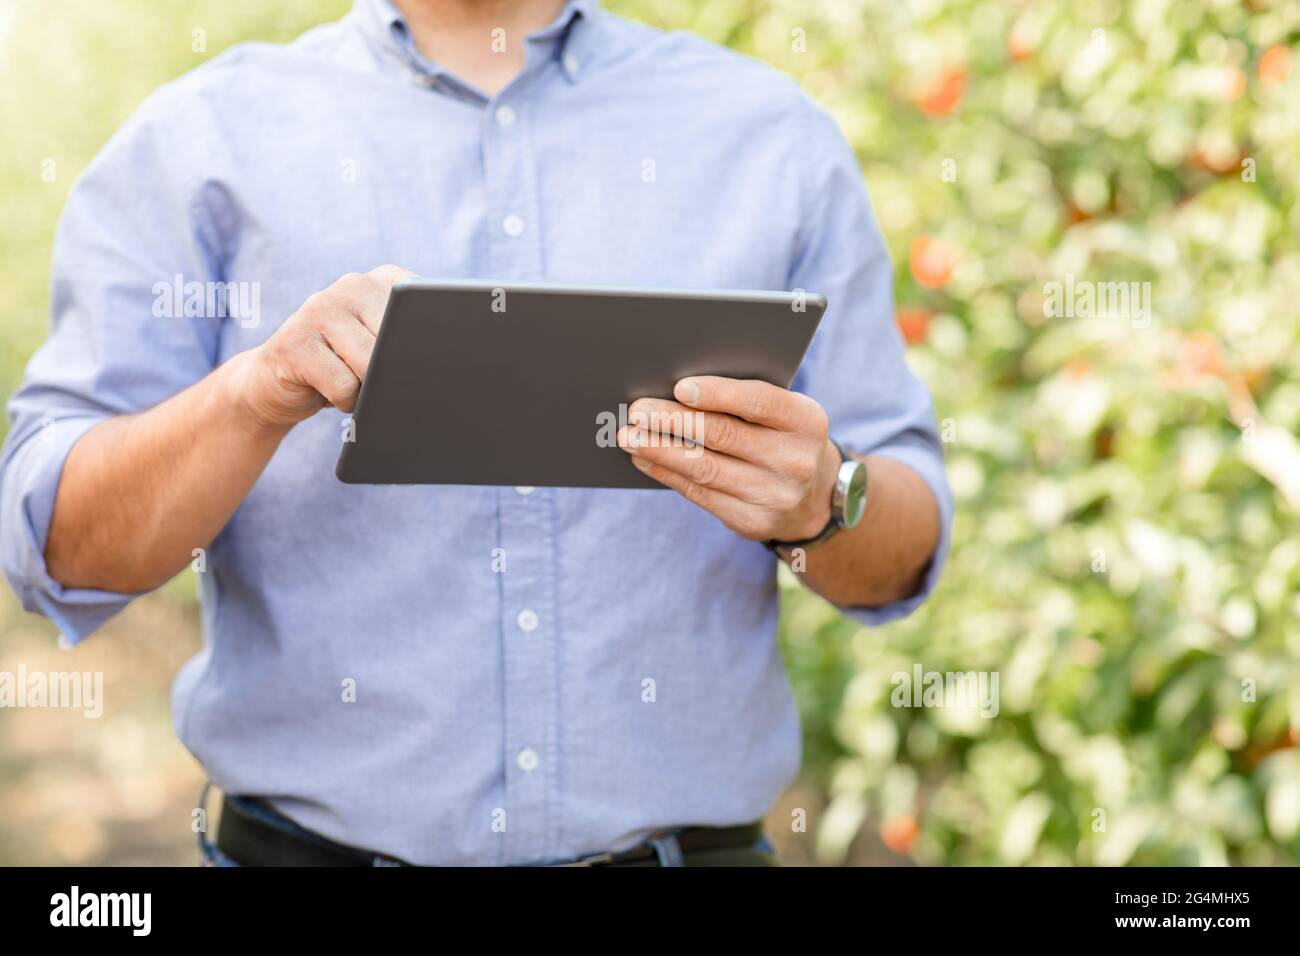 Smart farm management, growing organic fruits, control cultivation with mobile device Stock Photo